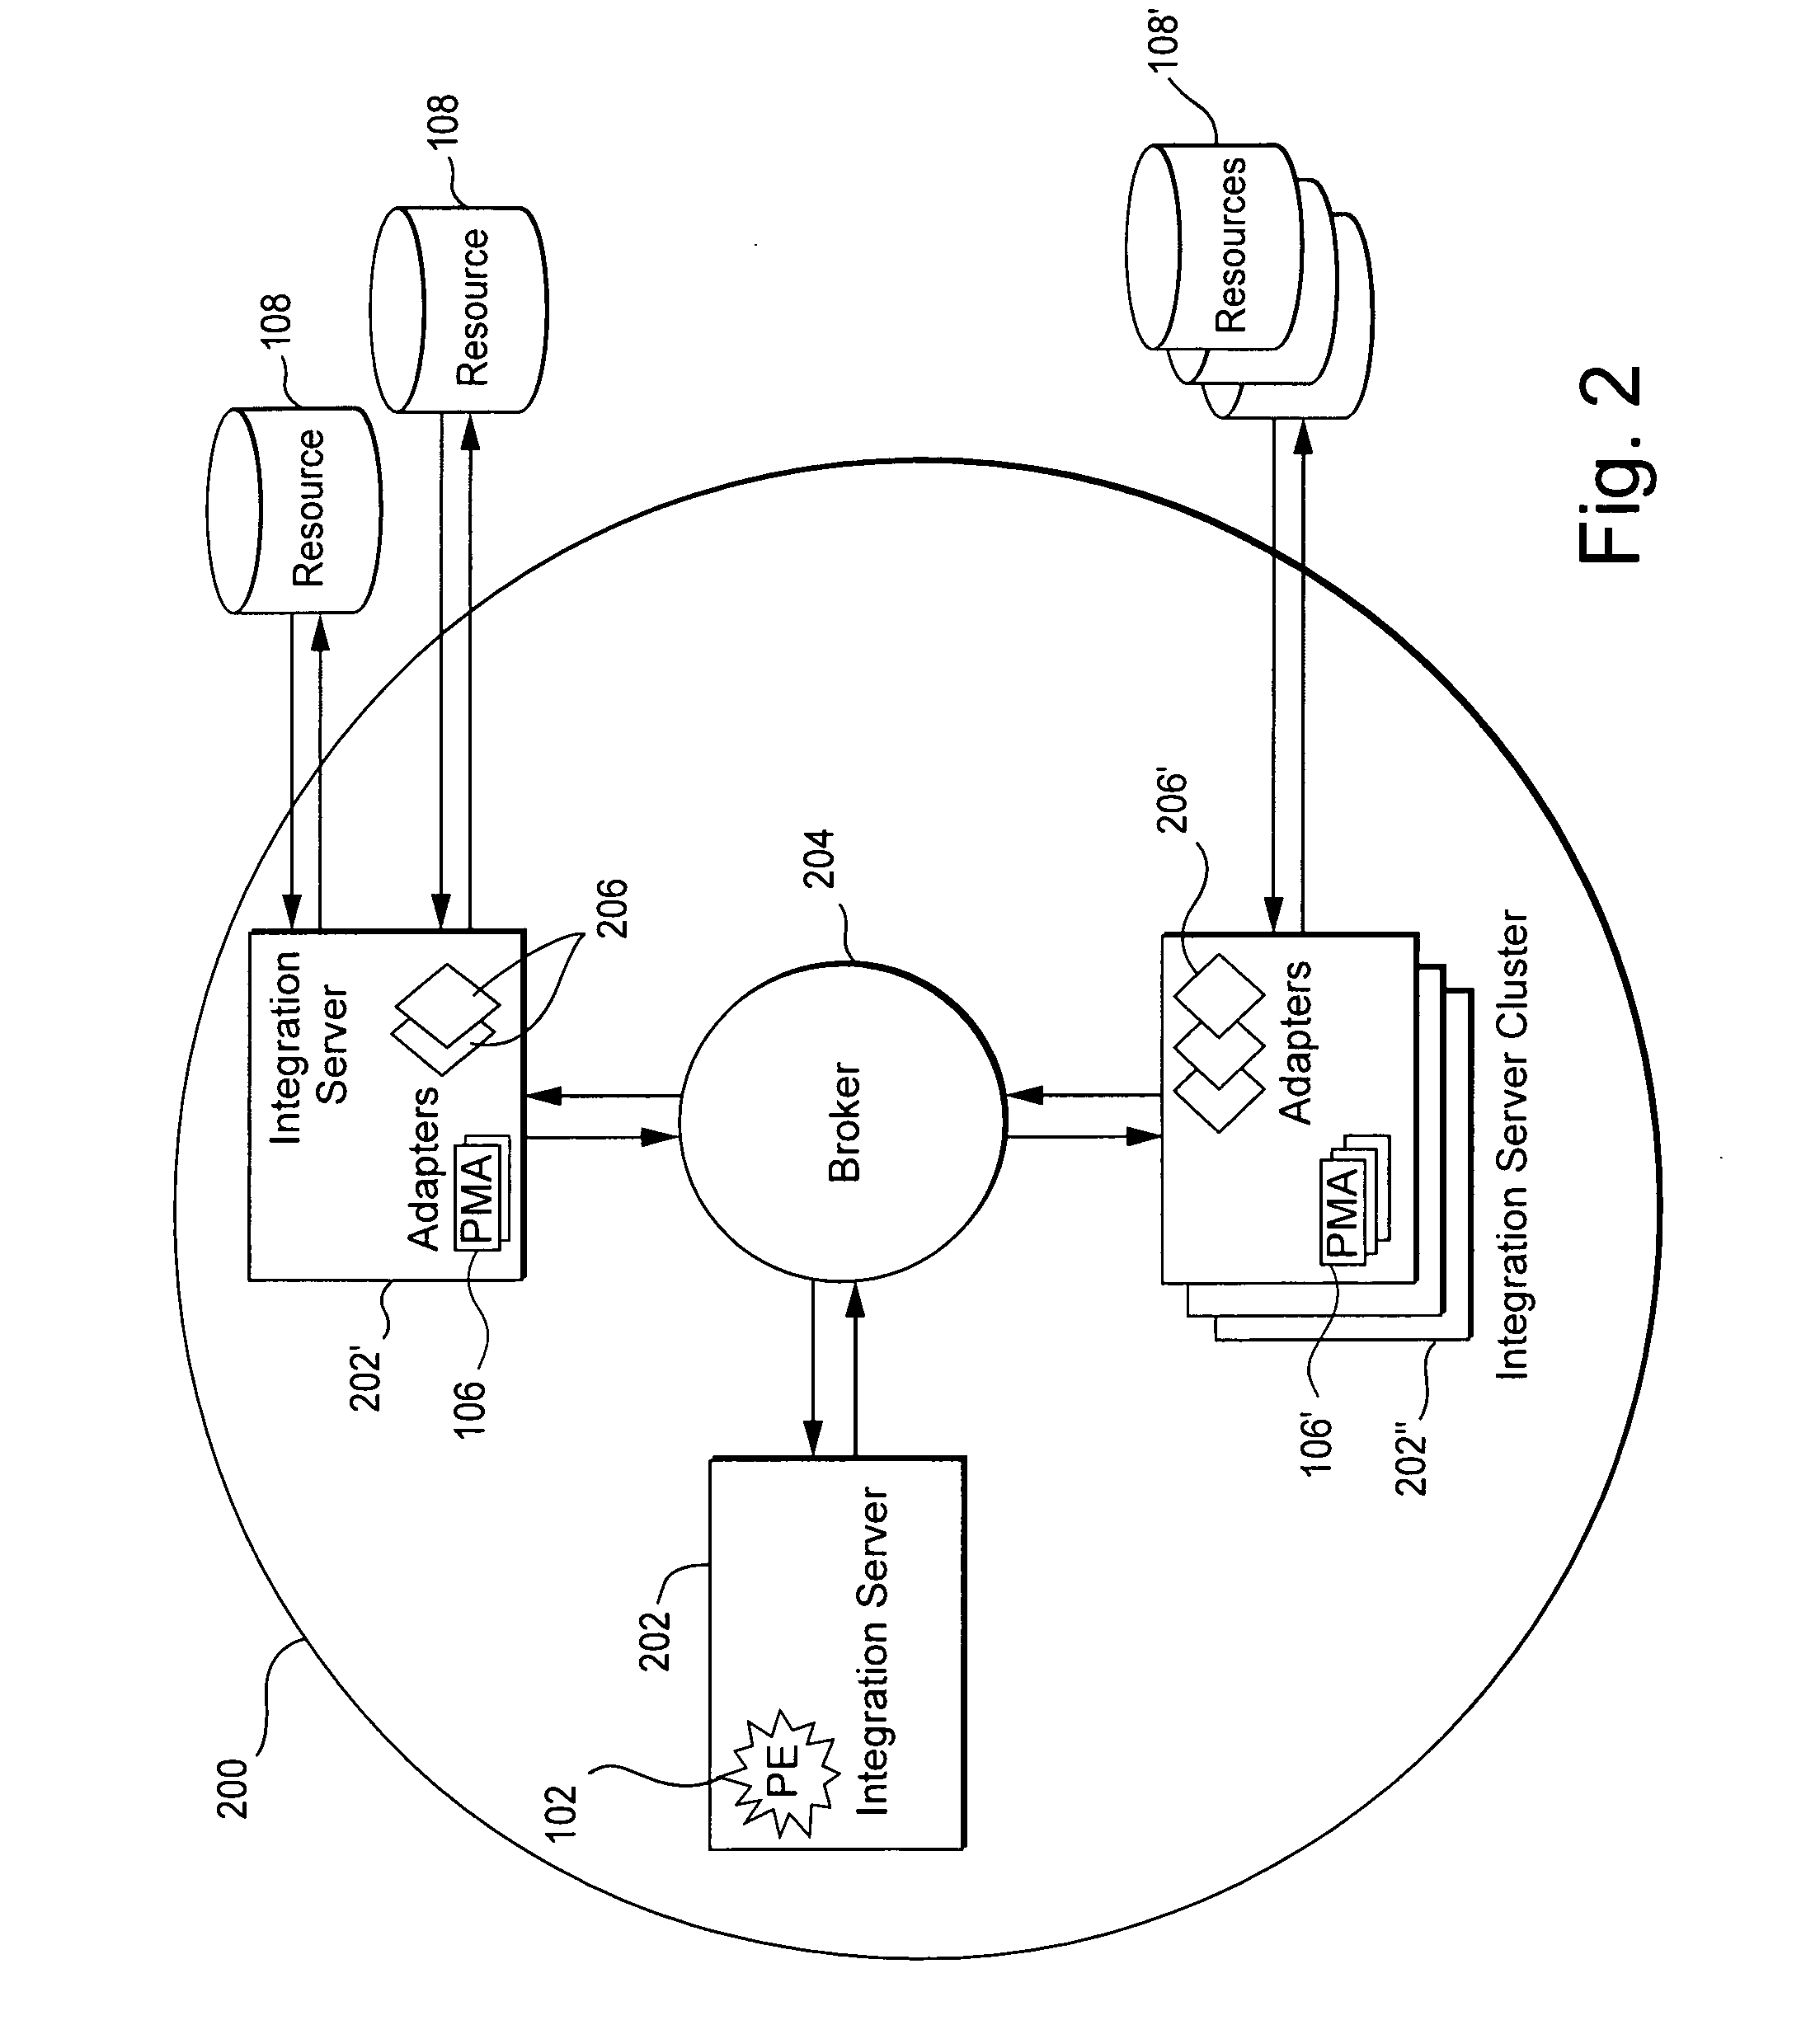 Systems and/or methods for end-to-end business process management, business event management, and/or business activity monitoring